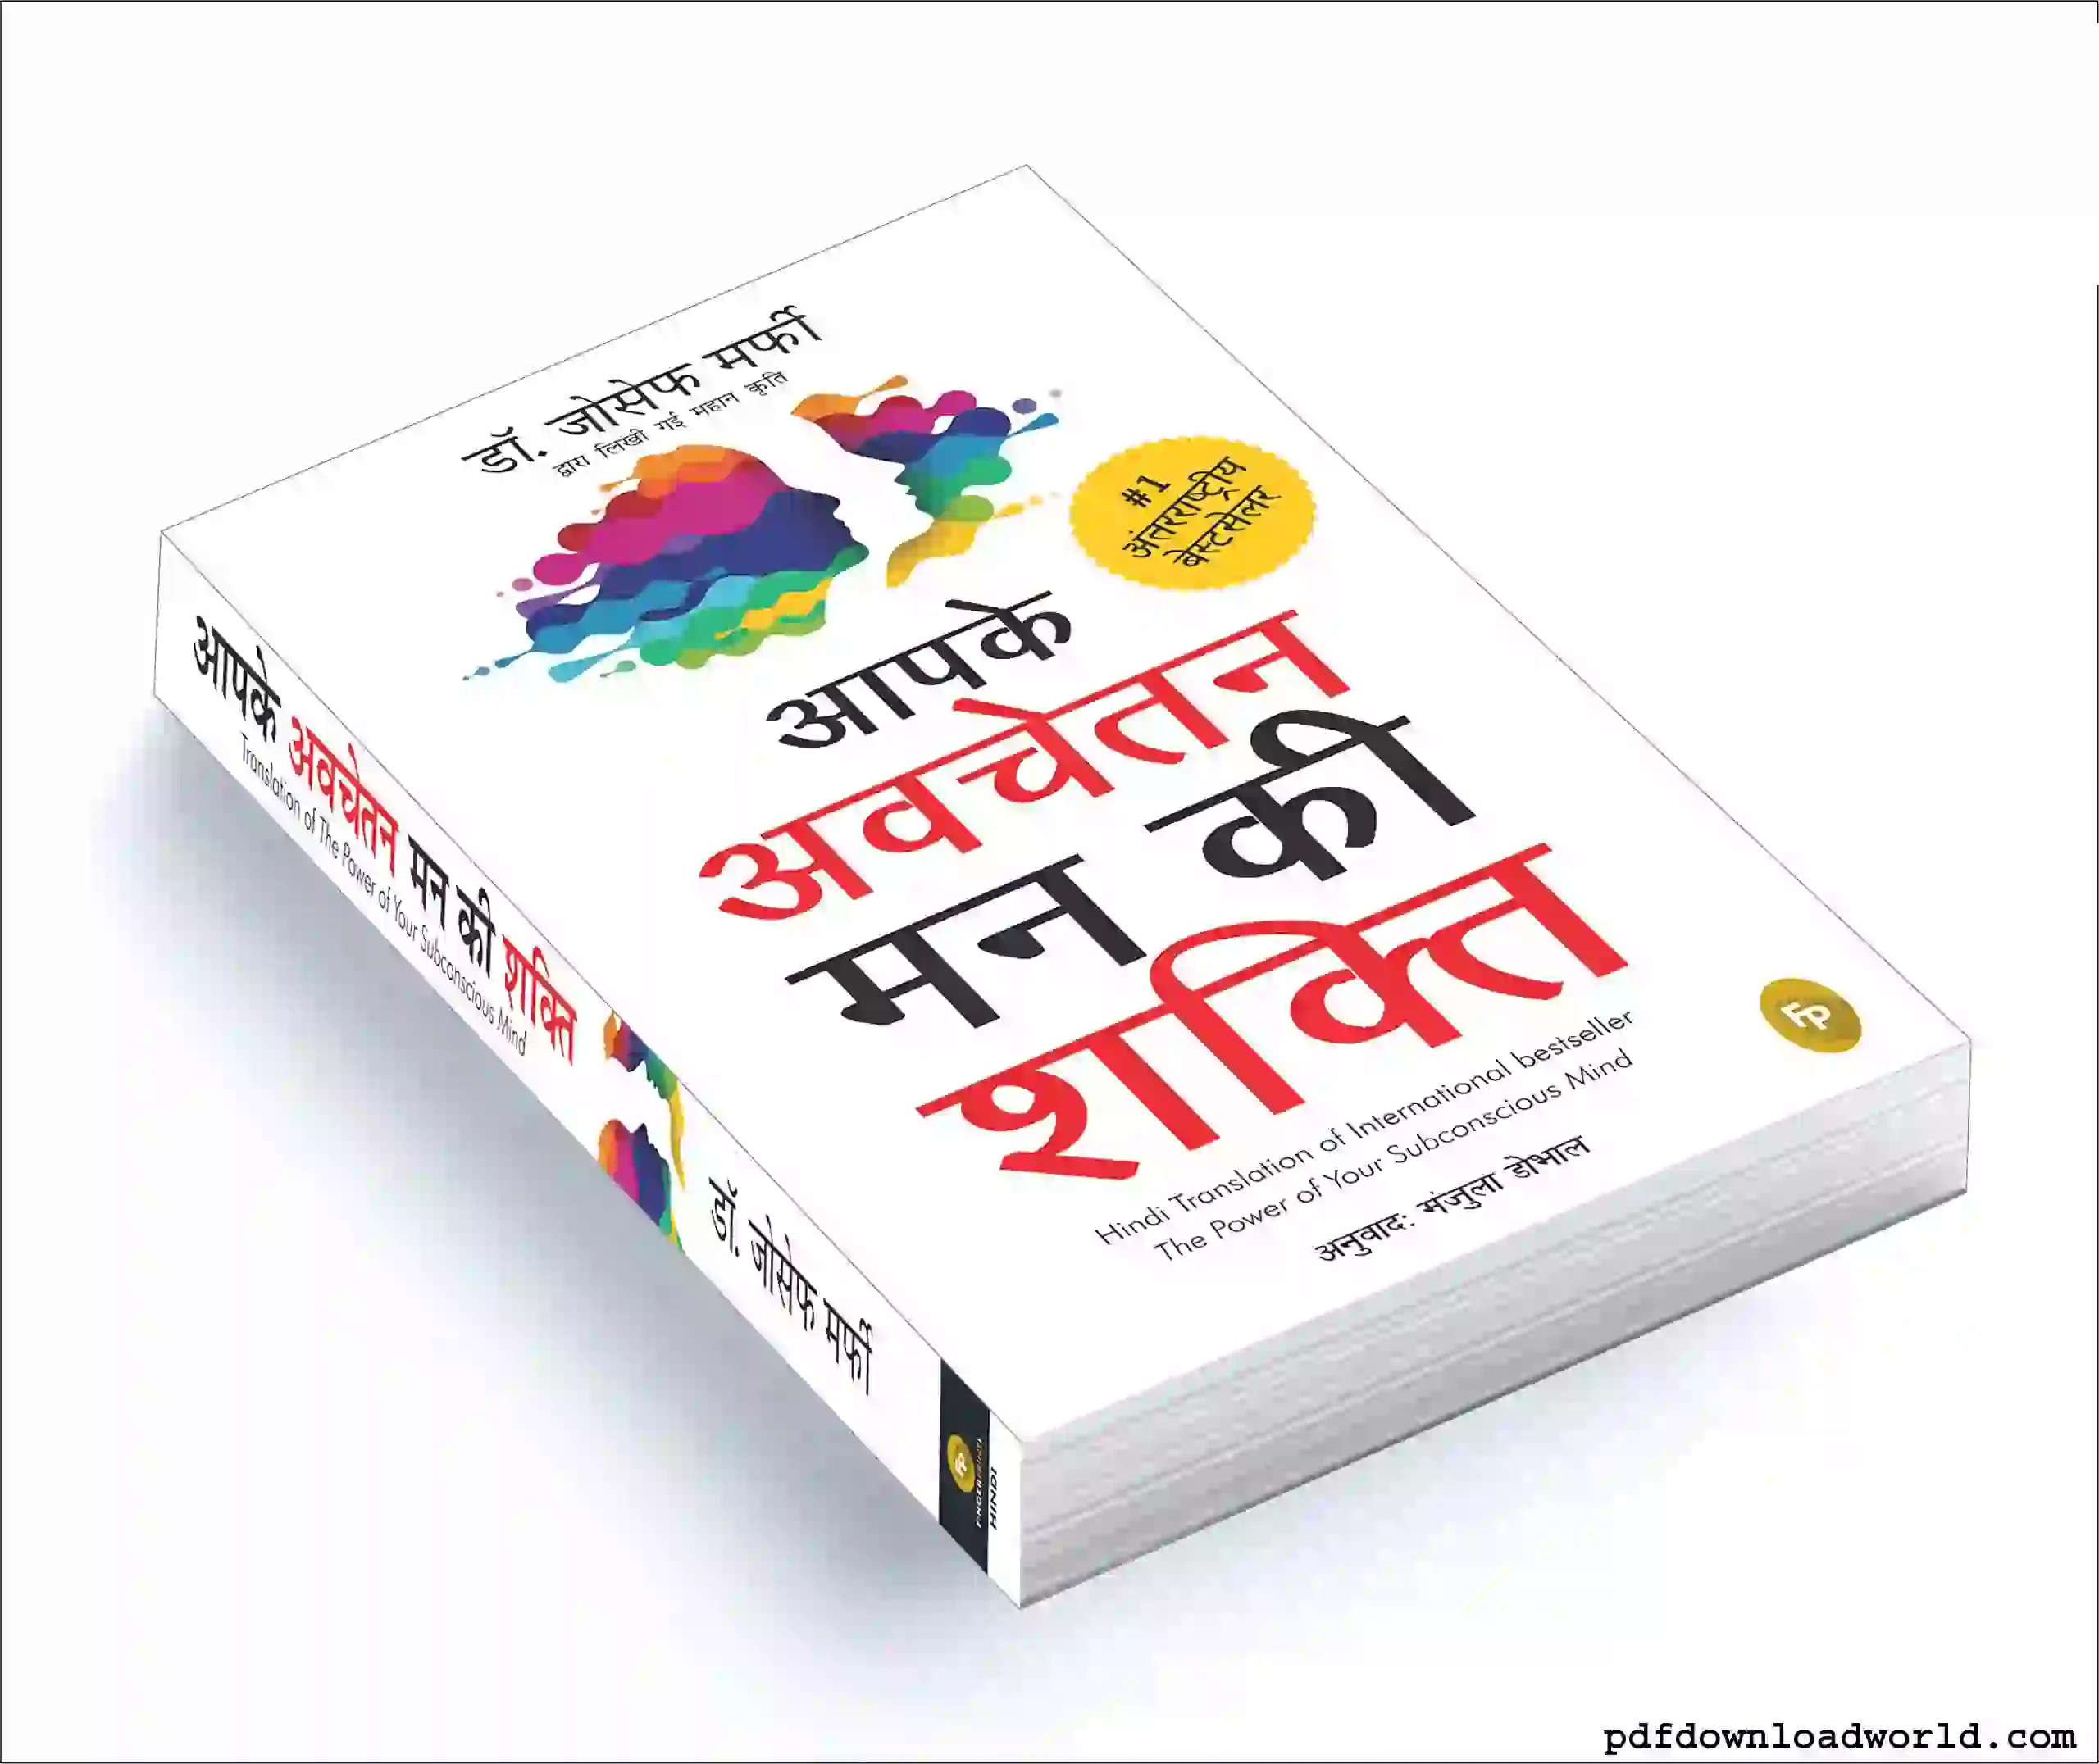 The Power Of Your Subconscious Mind In Hindi PDF, The Power Of Your Subconscious Mind PDF, The Power Of Your Subconscious Mind PDF Download, Power Of Subconscious Mind Book PDF, Power Of Your Subconscious Mind PDF,The Power Of Your Subconscious Mind PDF 